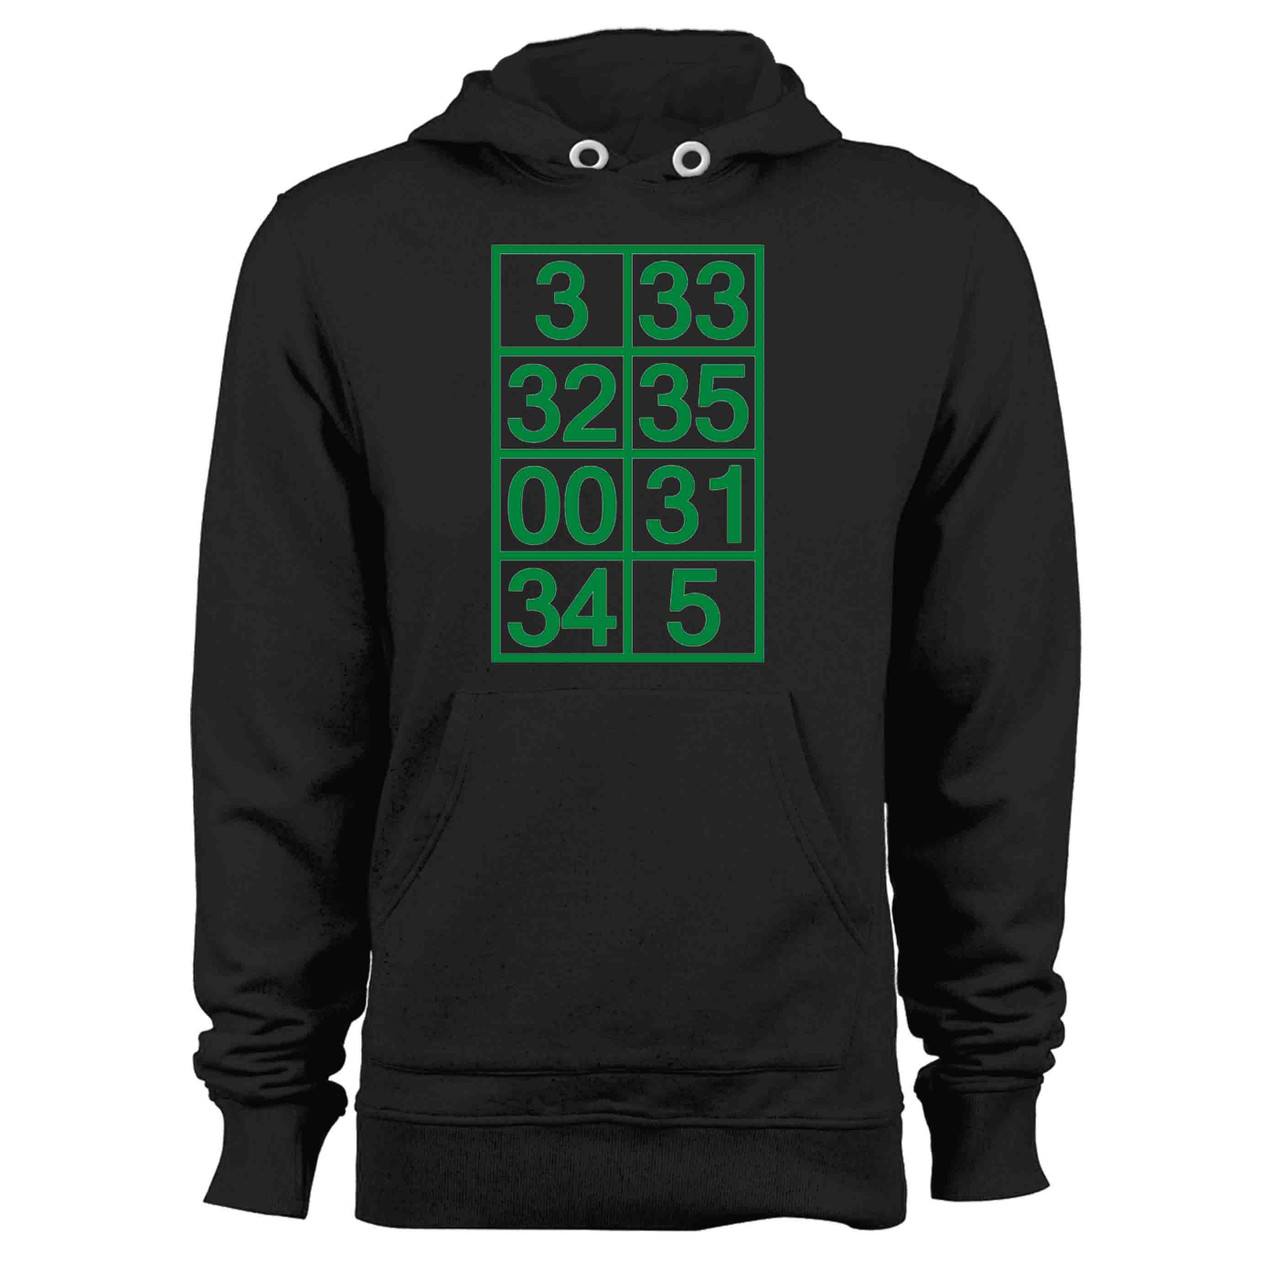 Boston Celtics Retired Numbers shirt, hoodie, sweater, long sleeve and tank  top